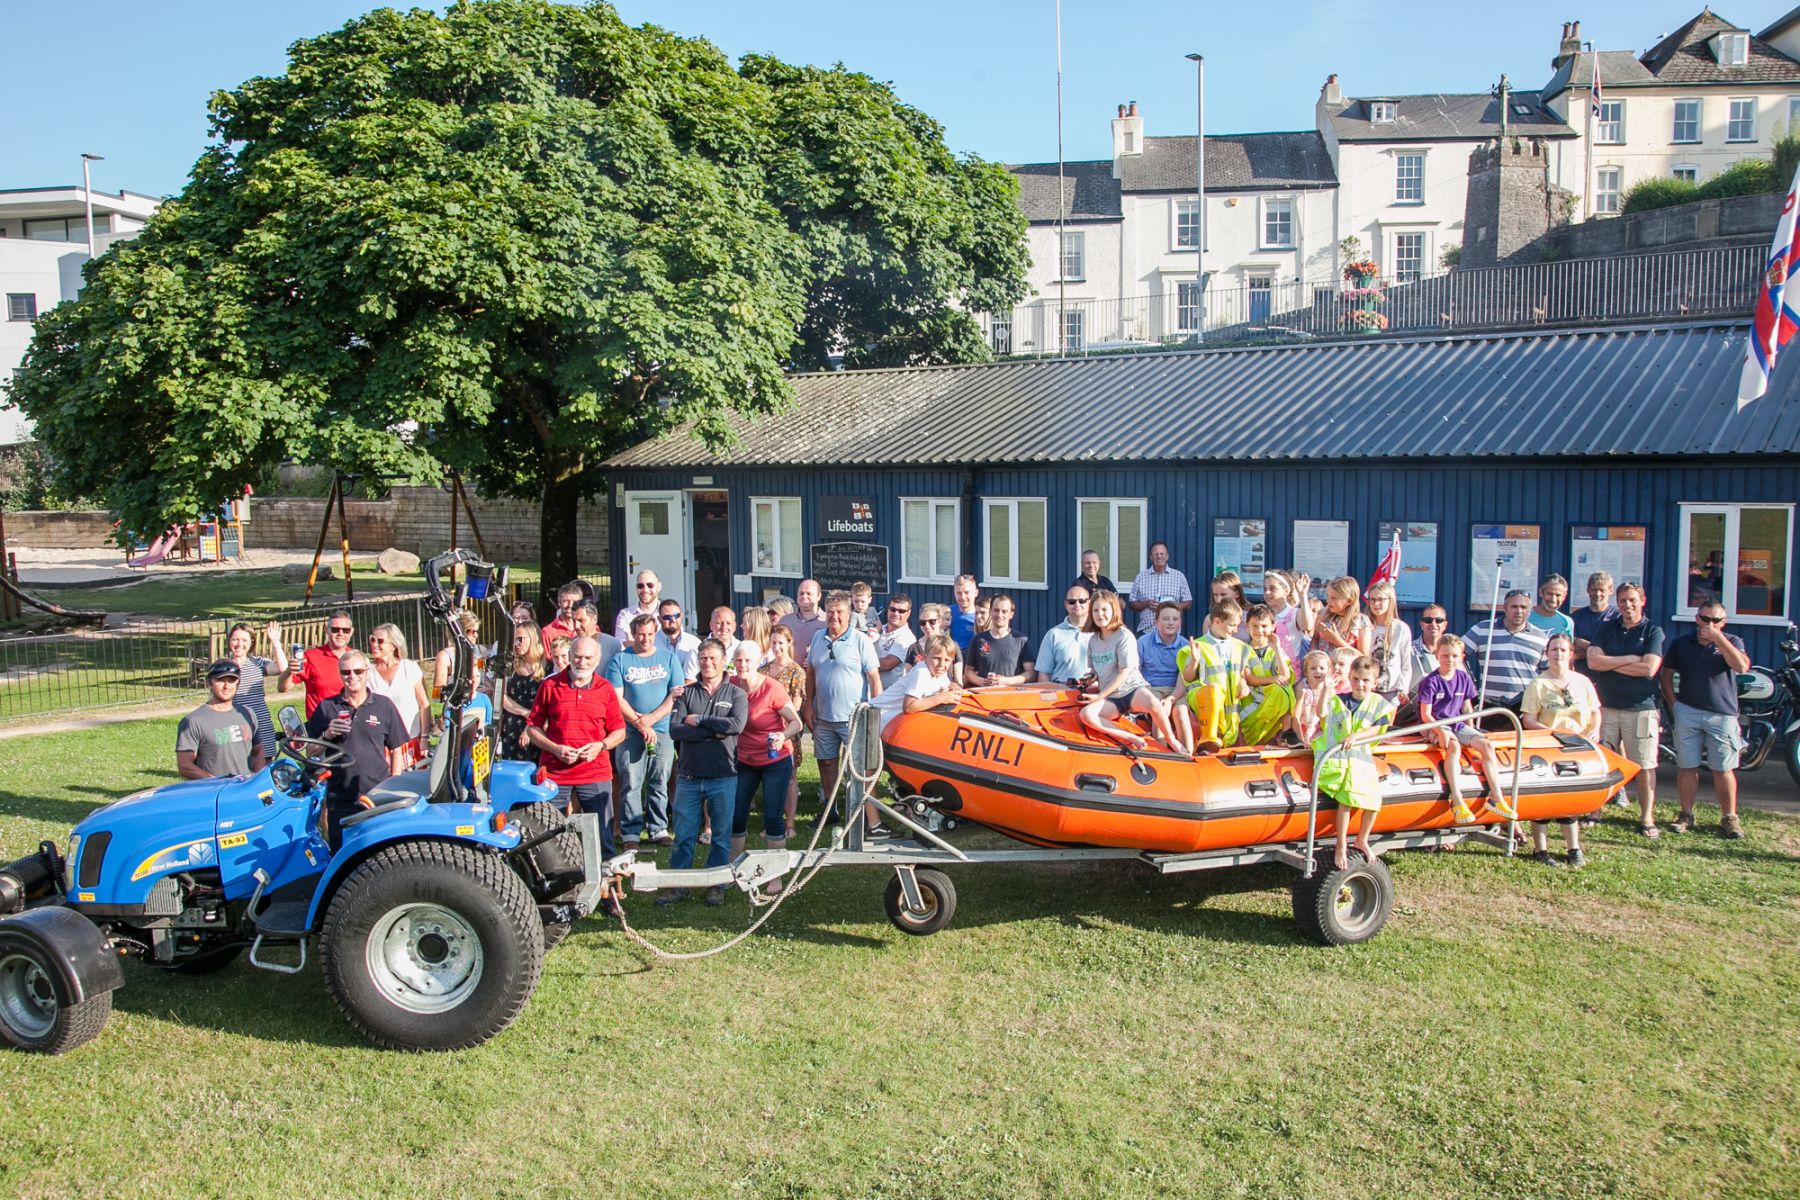 The crew held a farewell party for the Spirit of the Dart.